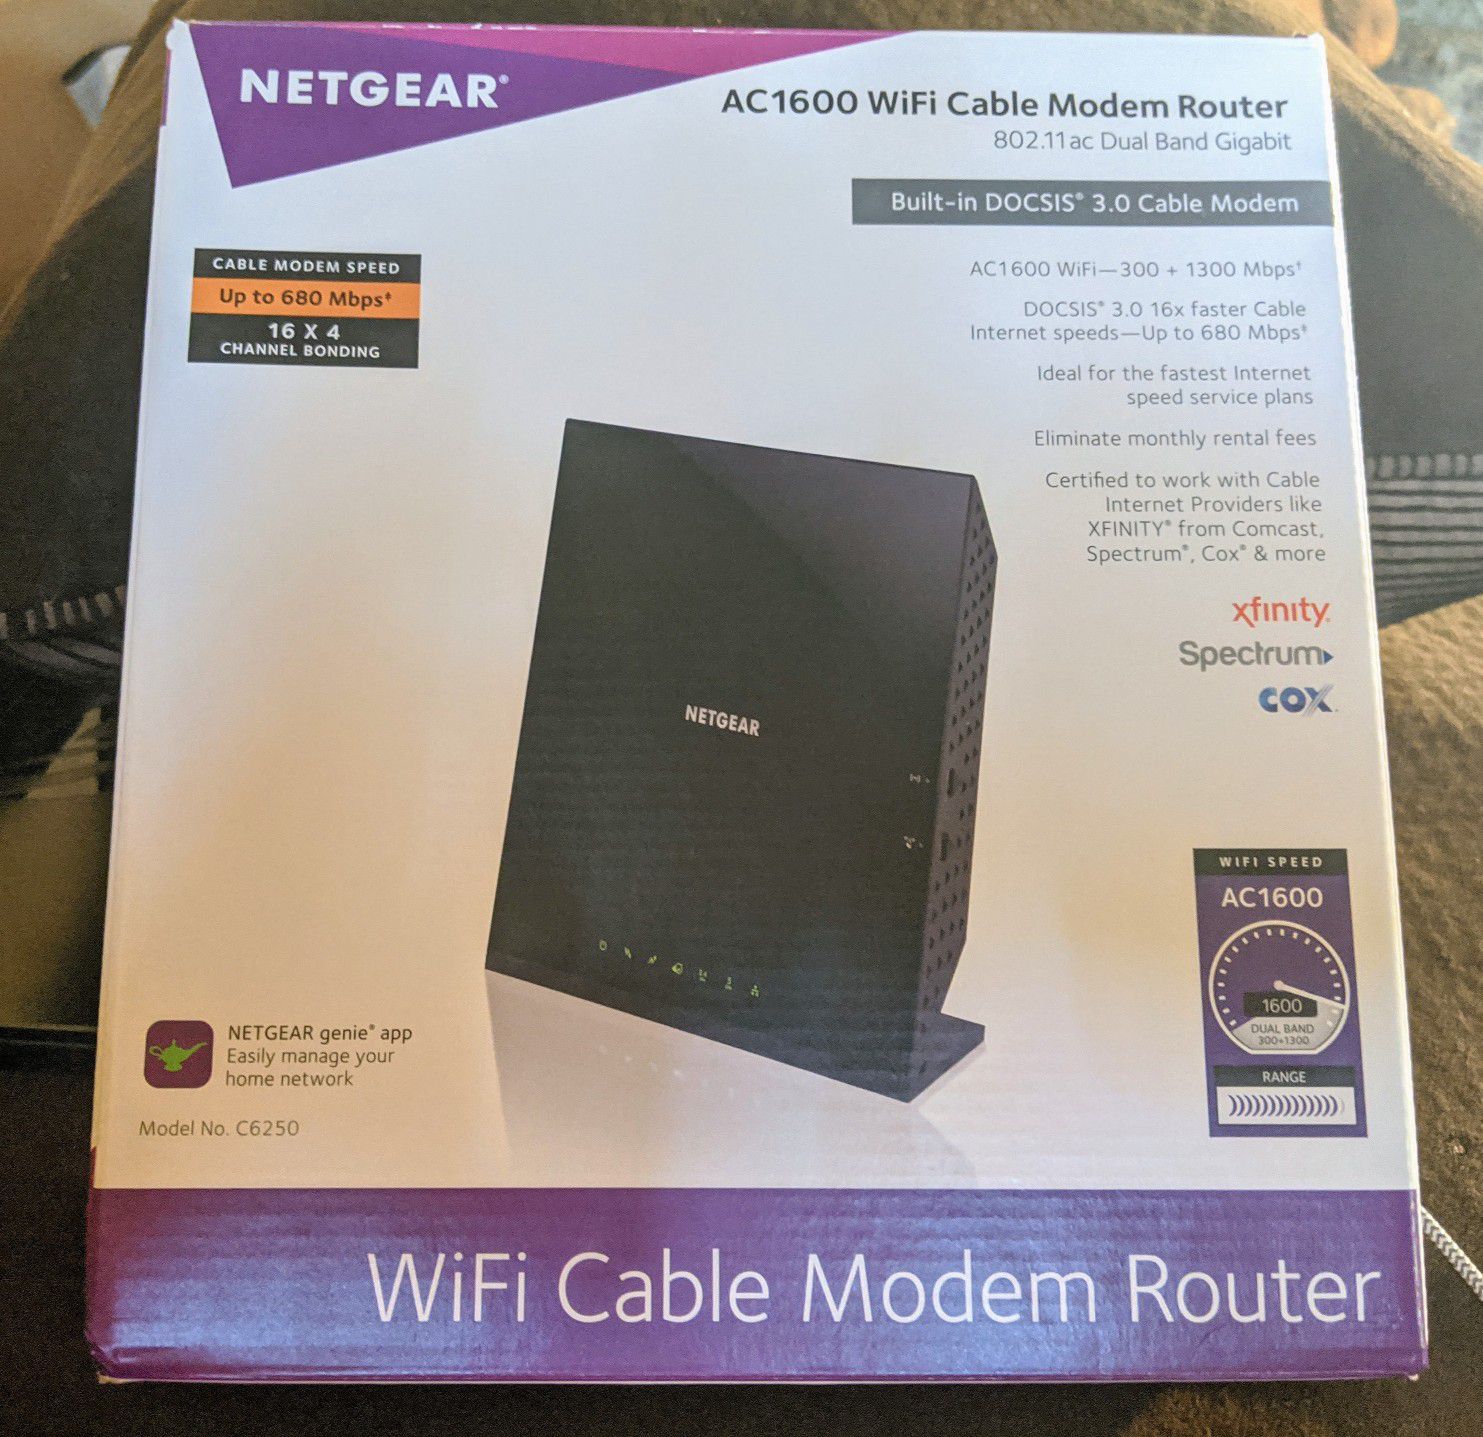 NetGear WiFi Cable Modem Router with 3 year SquareTrade Warranty